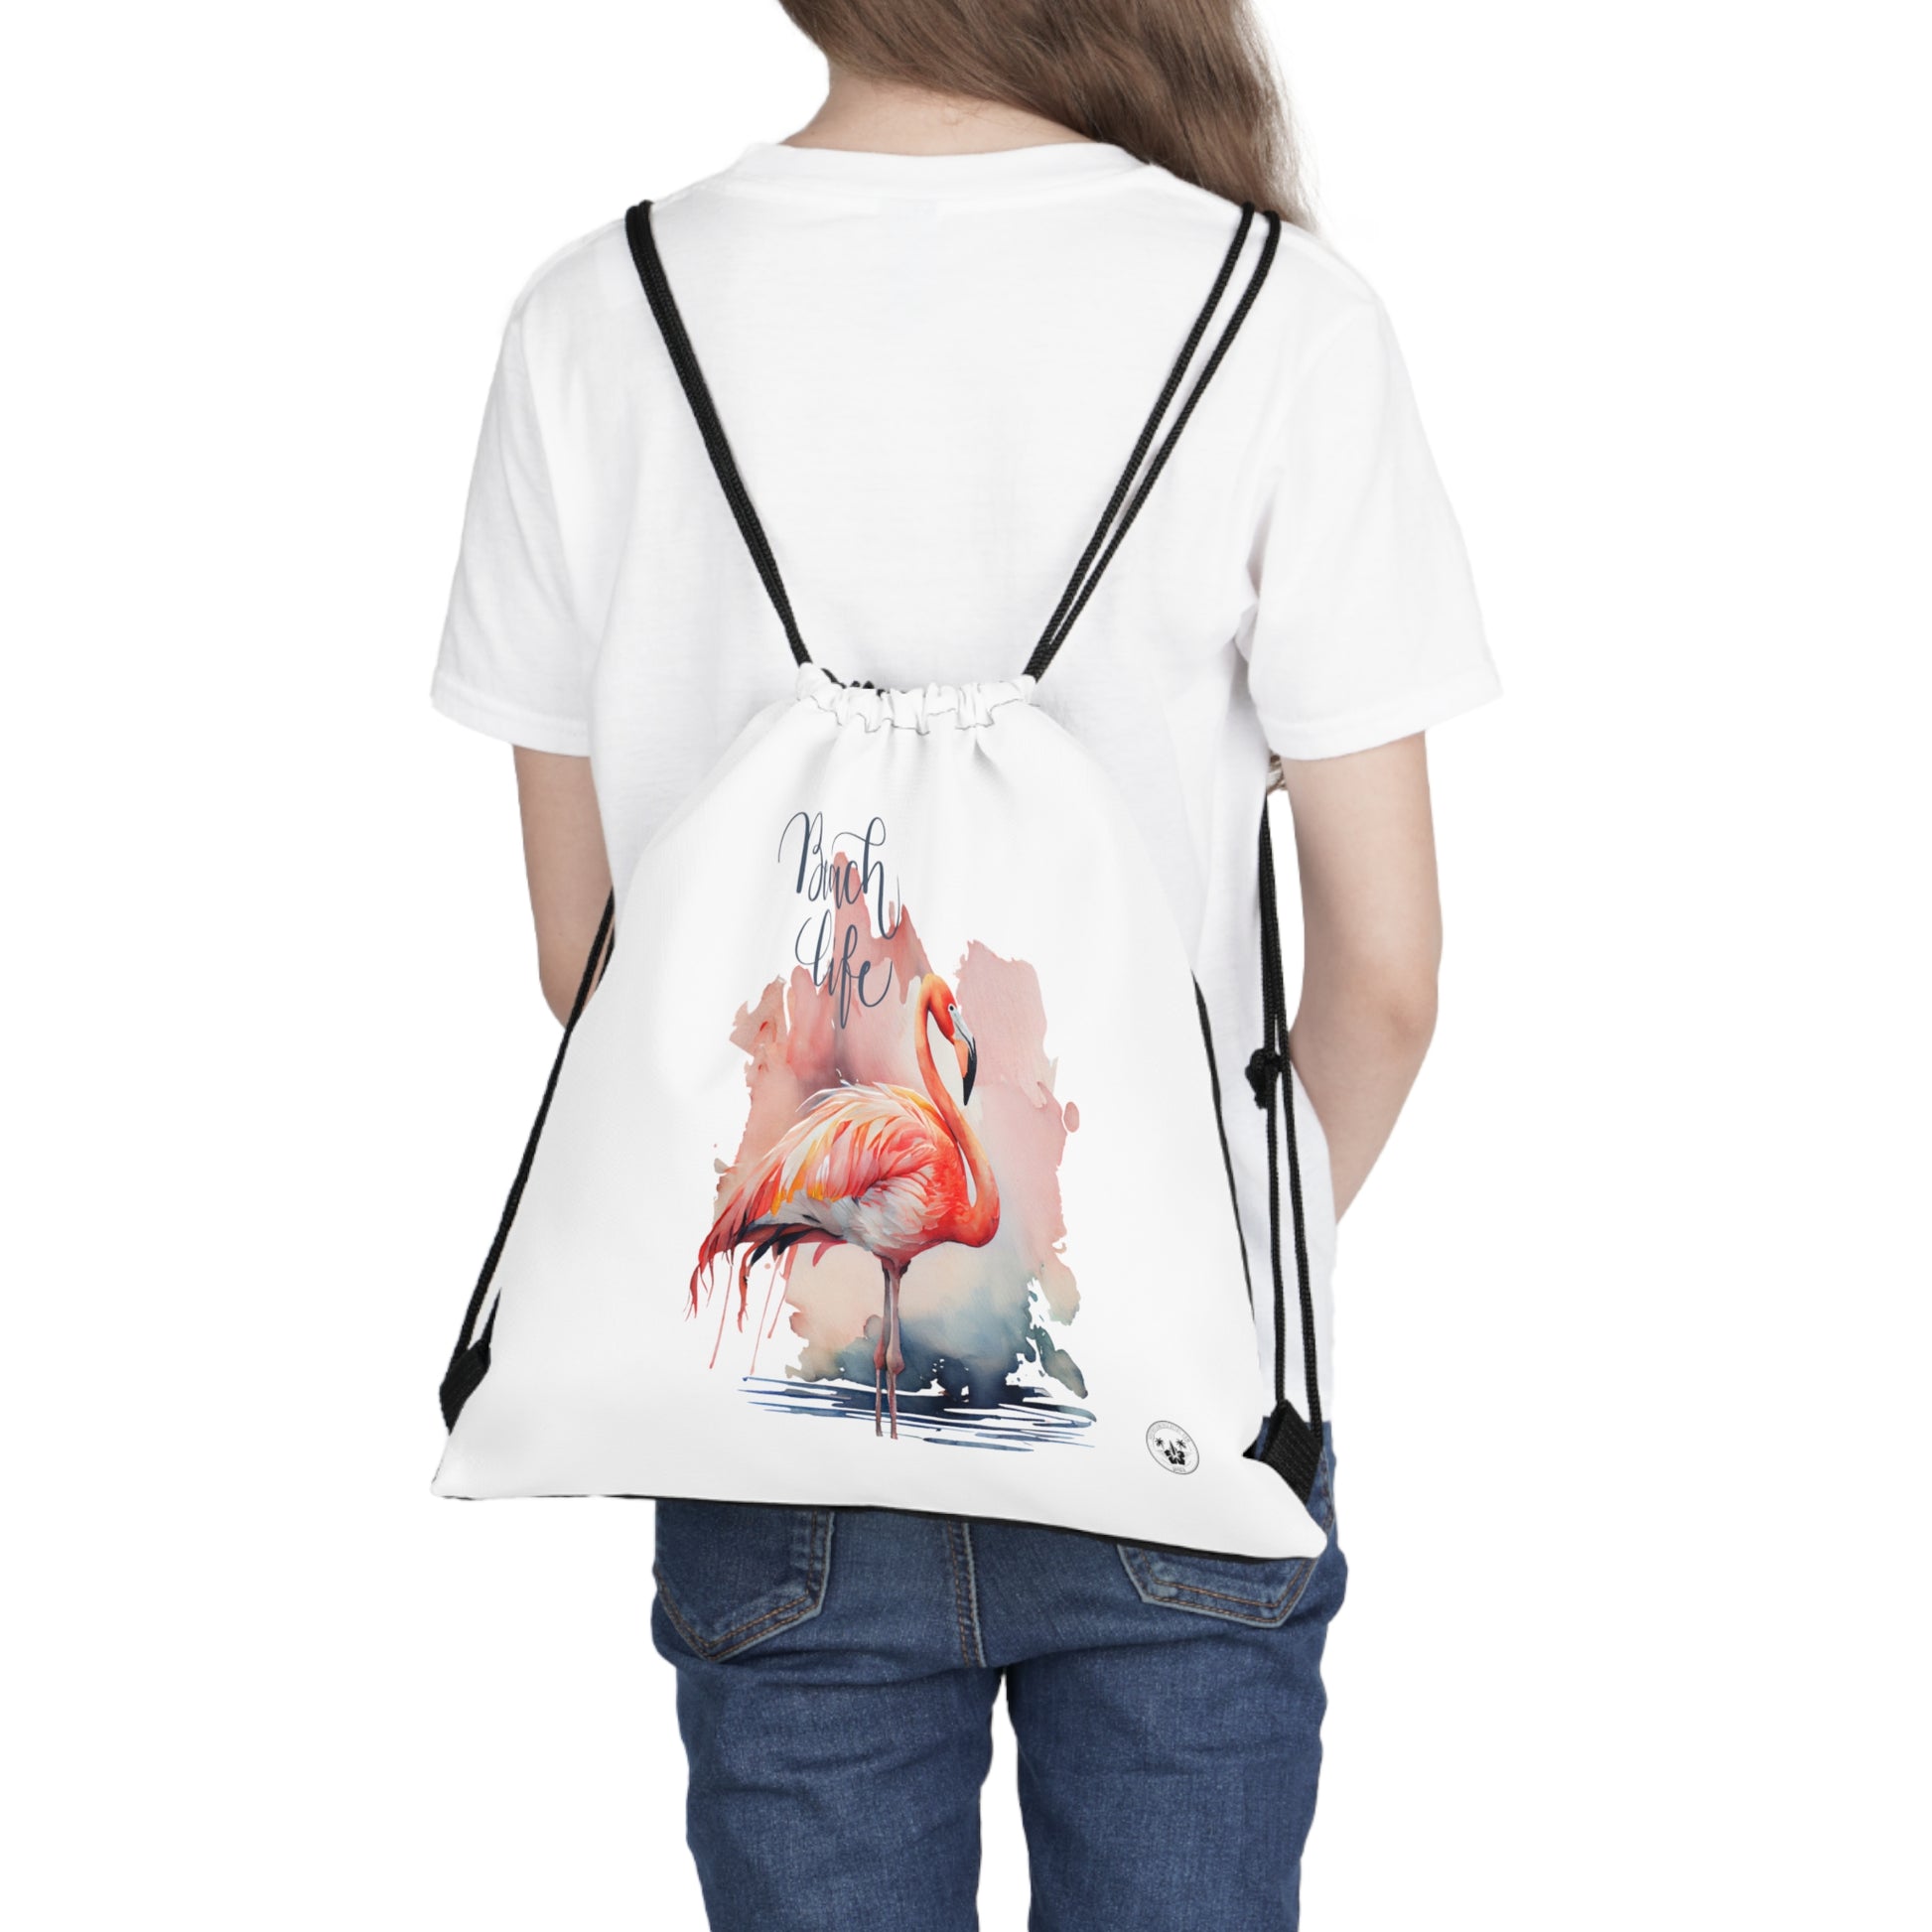 Unleash your wanderlust with our versatile drawstring backpack! Embrace travel with ease and style, flaunting a Beach Life Flamingo graphic with bright color backgrounds. This one is a white background. Designed for adventurers, it's the perfect blend of practicality and fashion. Get yours today for your next adventure! This is a front view of the backpack on the back of a model. 